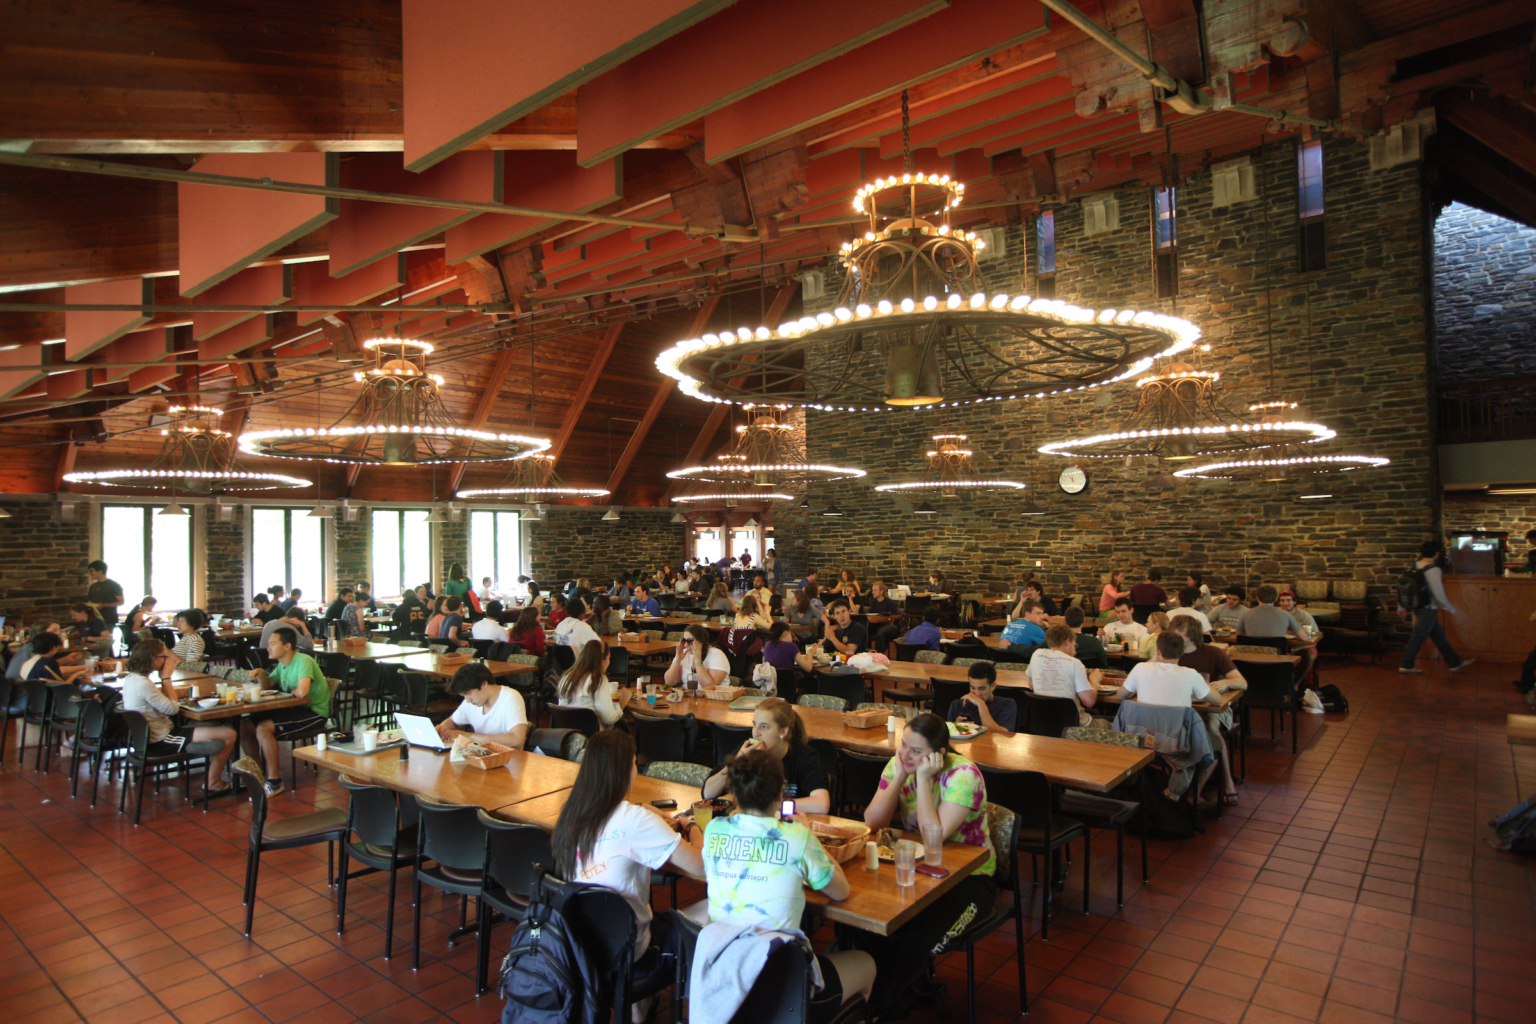 Sharples Dining Hall at Swarthmore College